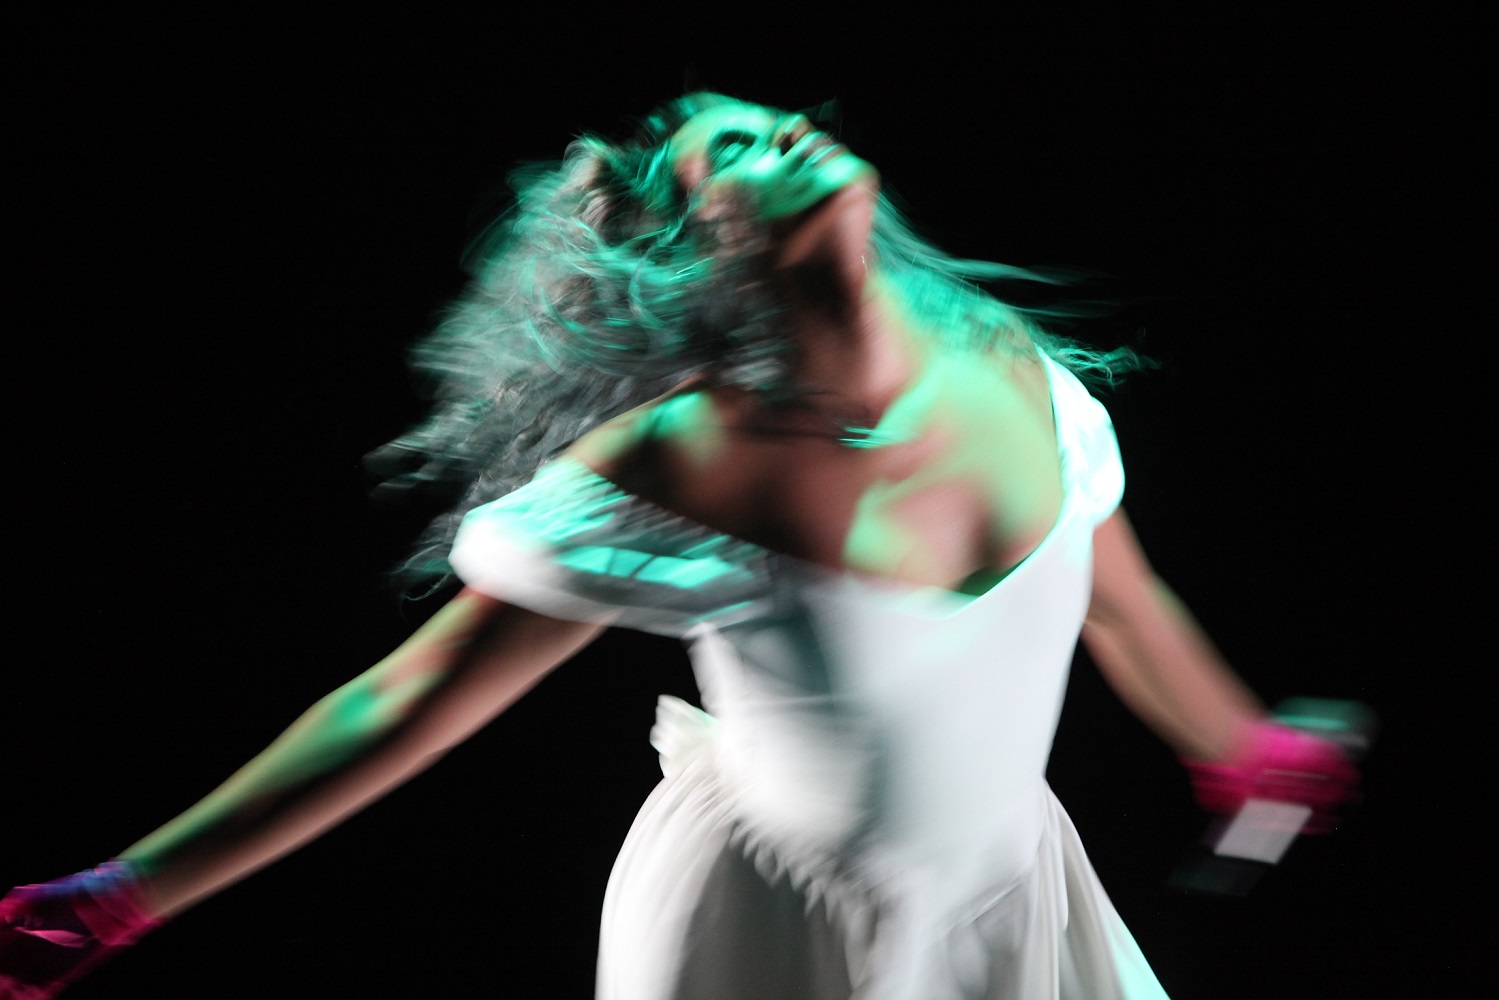 Performances of the Biennale Theatre / Dance / Music now on sale